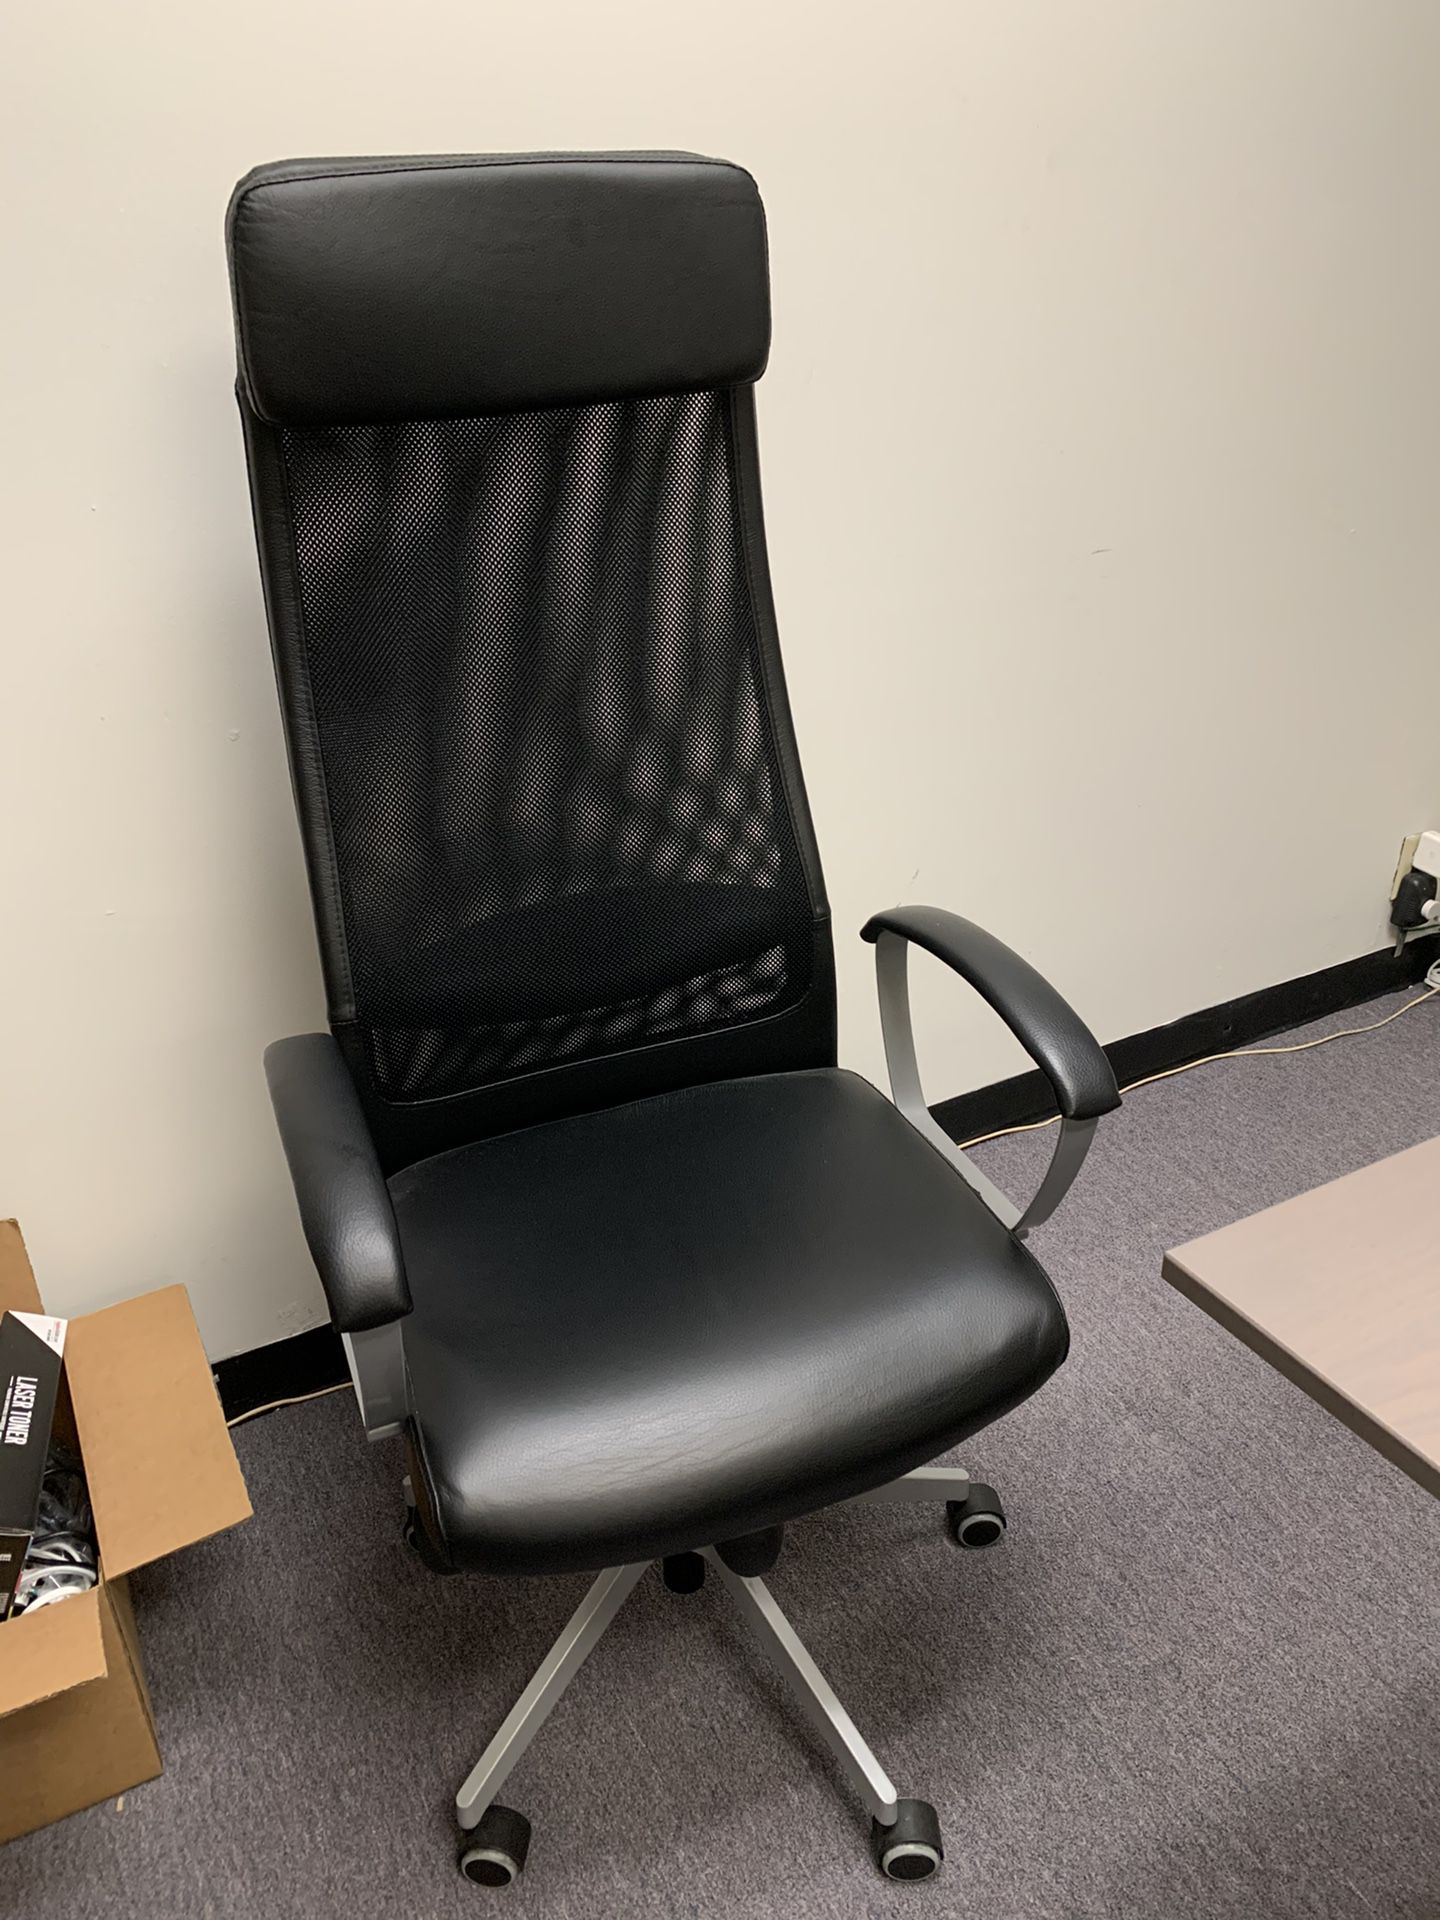 Office chair#2 (only one chair)